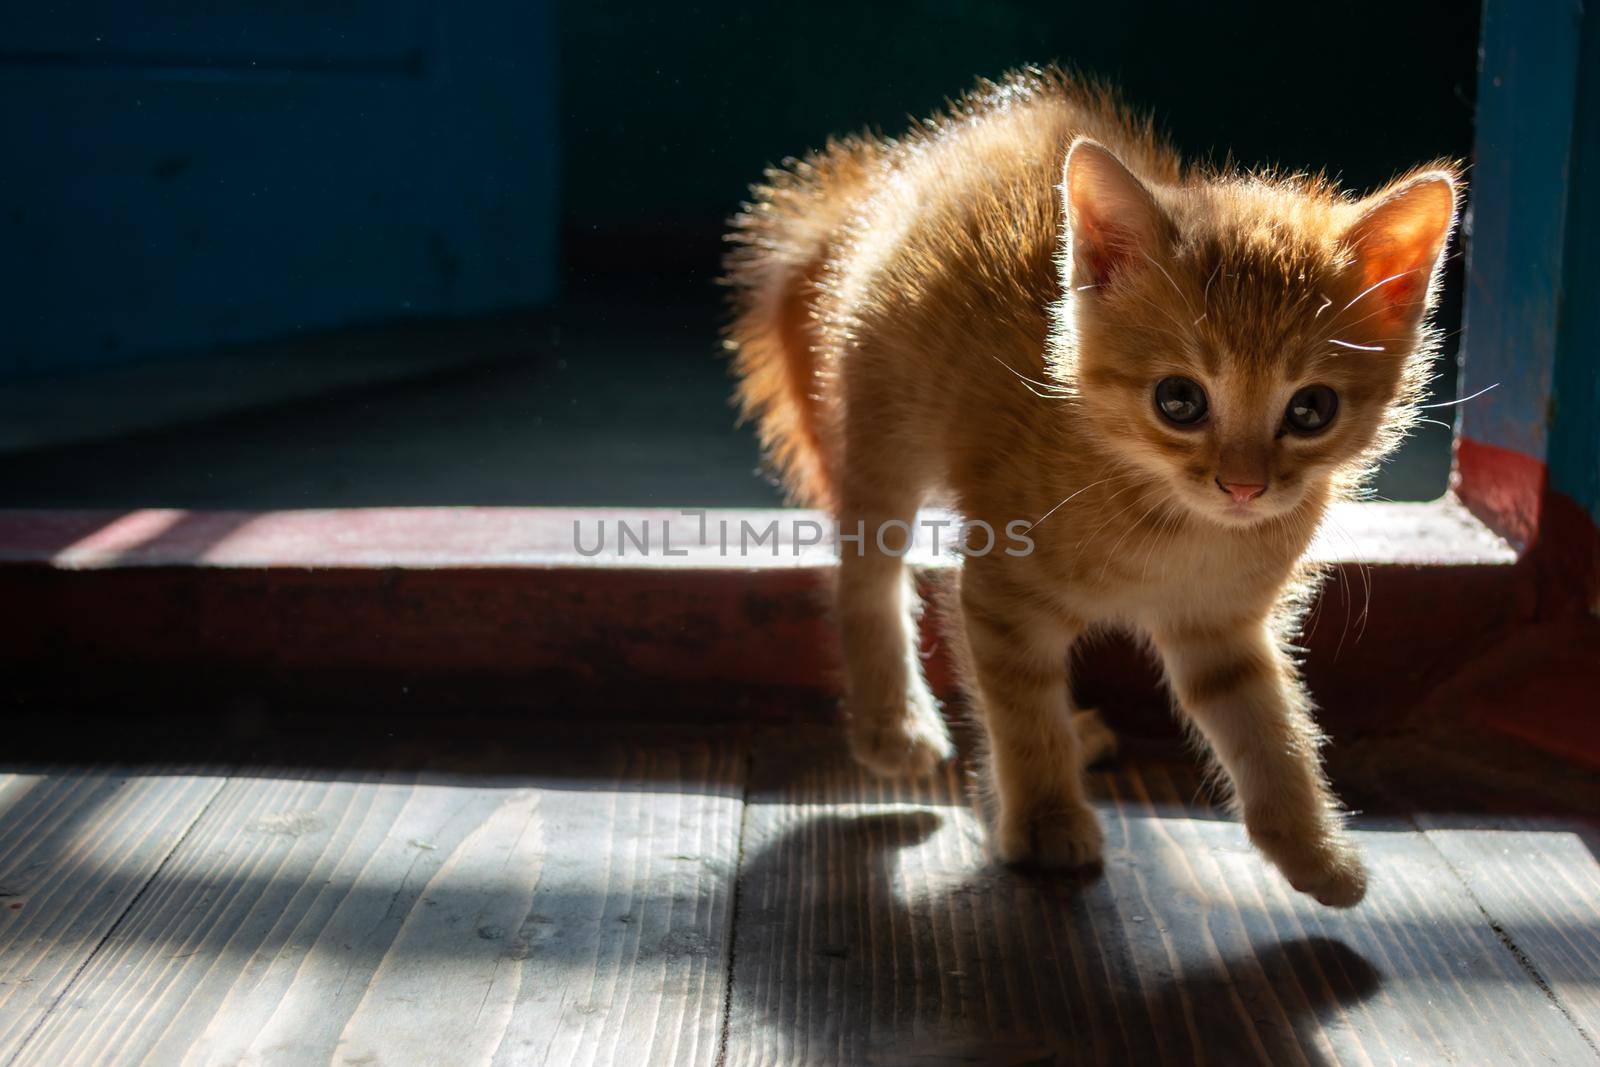 Frightened little red kitten in an old house. Light from the window.